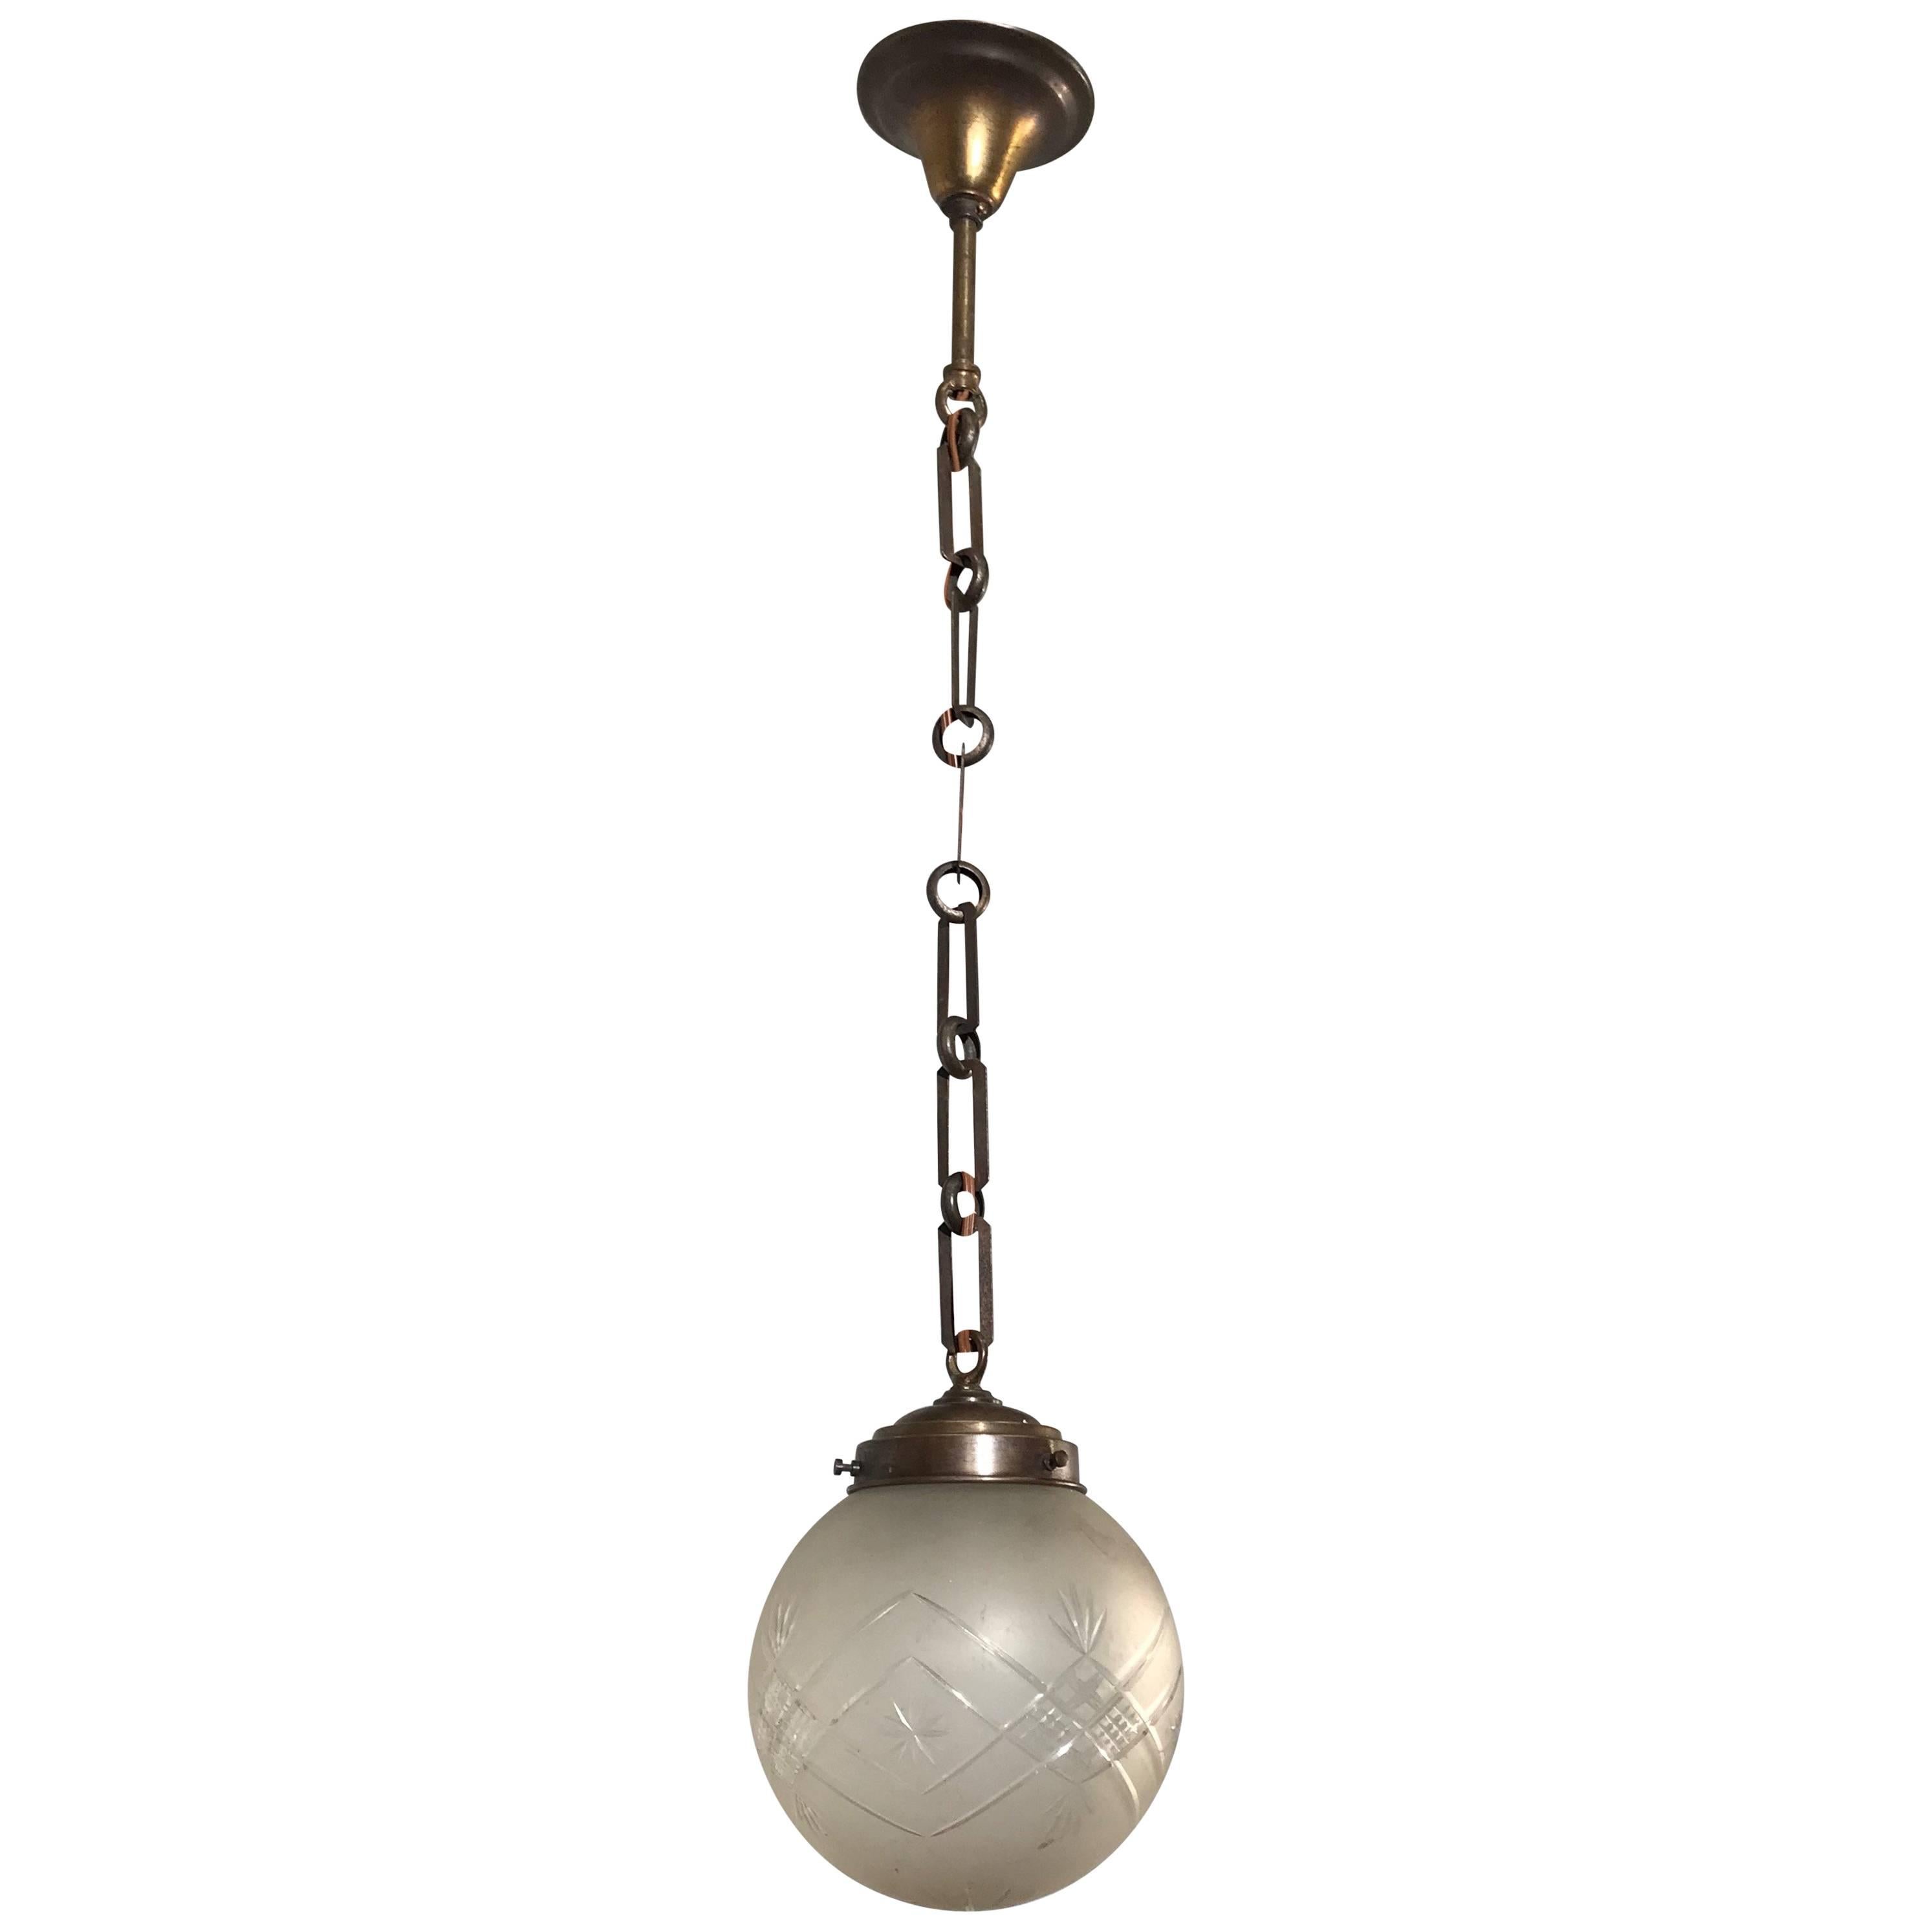 Early 20th Century Brass and Hand-Cut Glass Globe Small Pendant Light Fixture